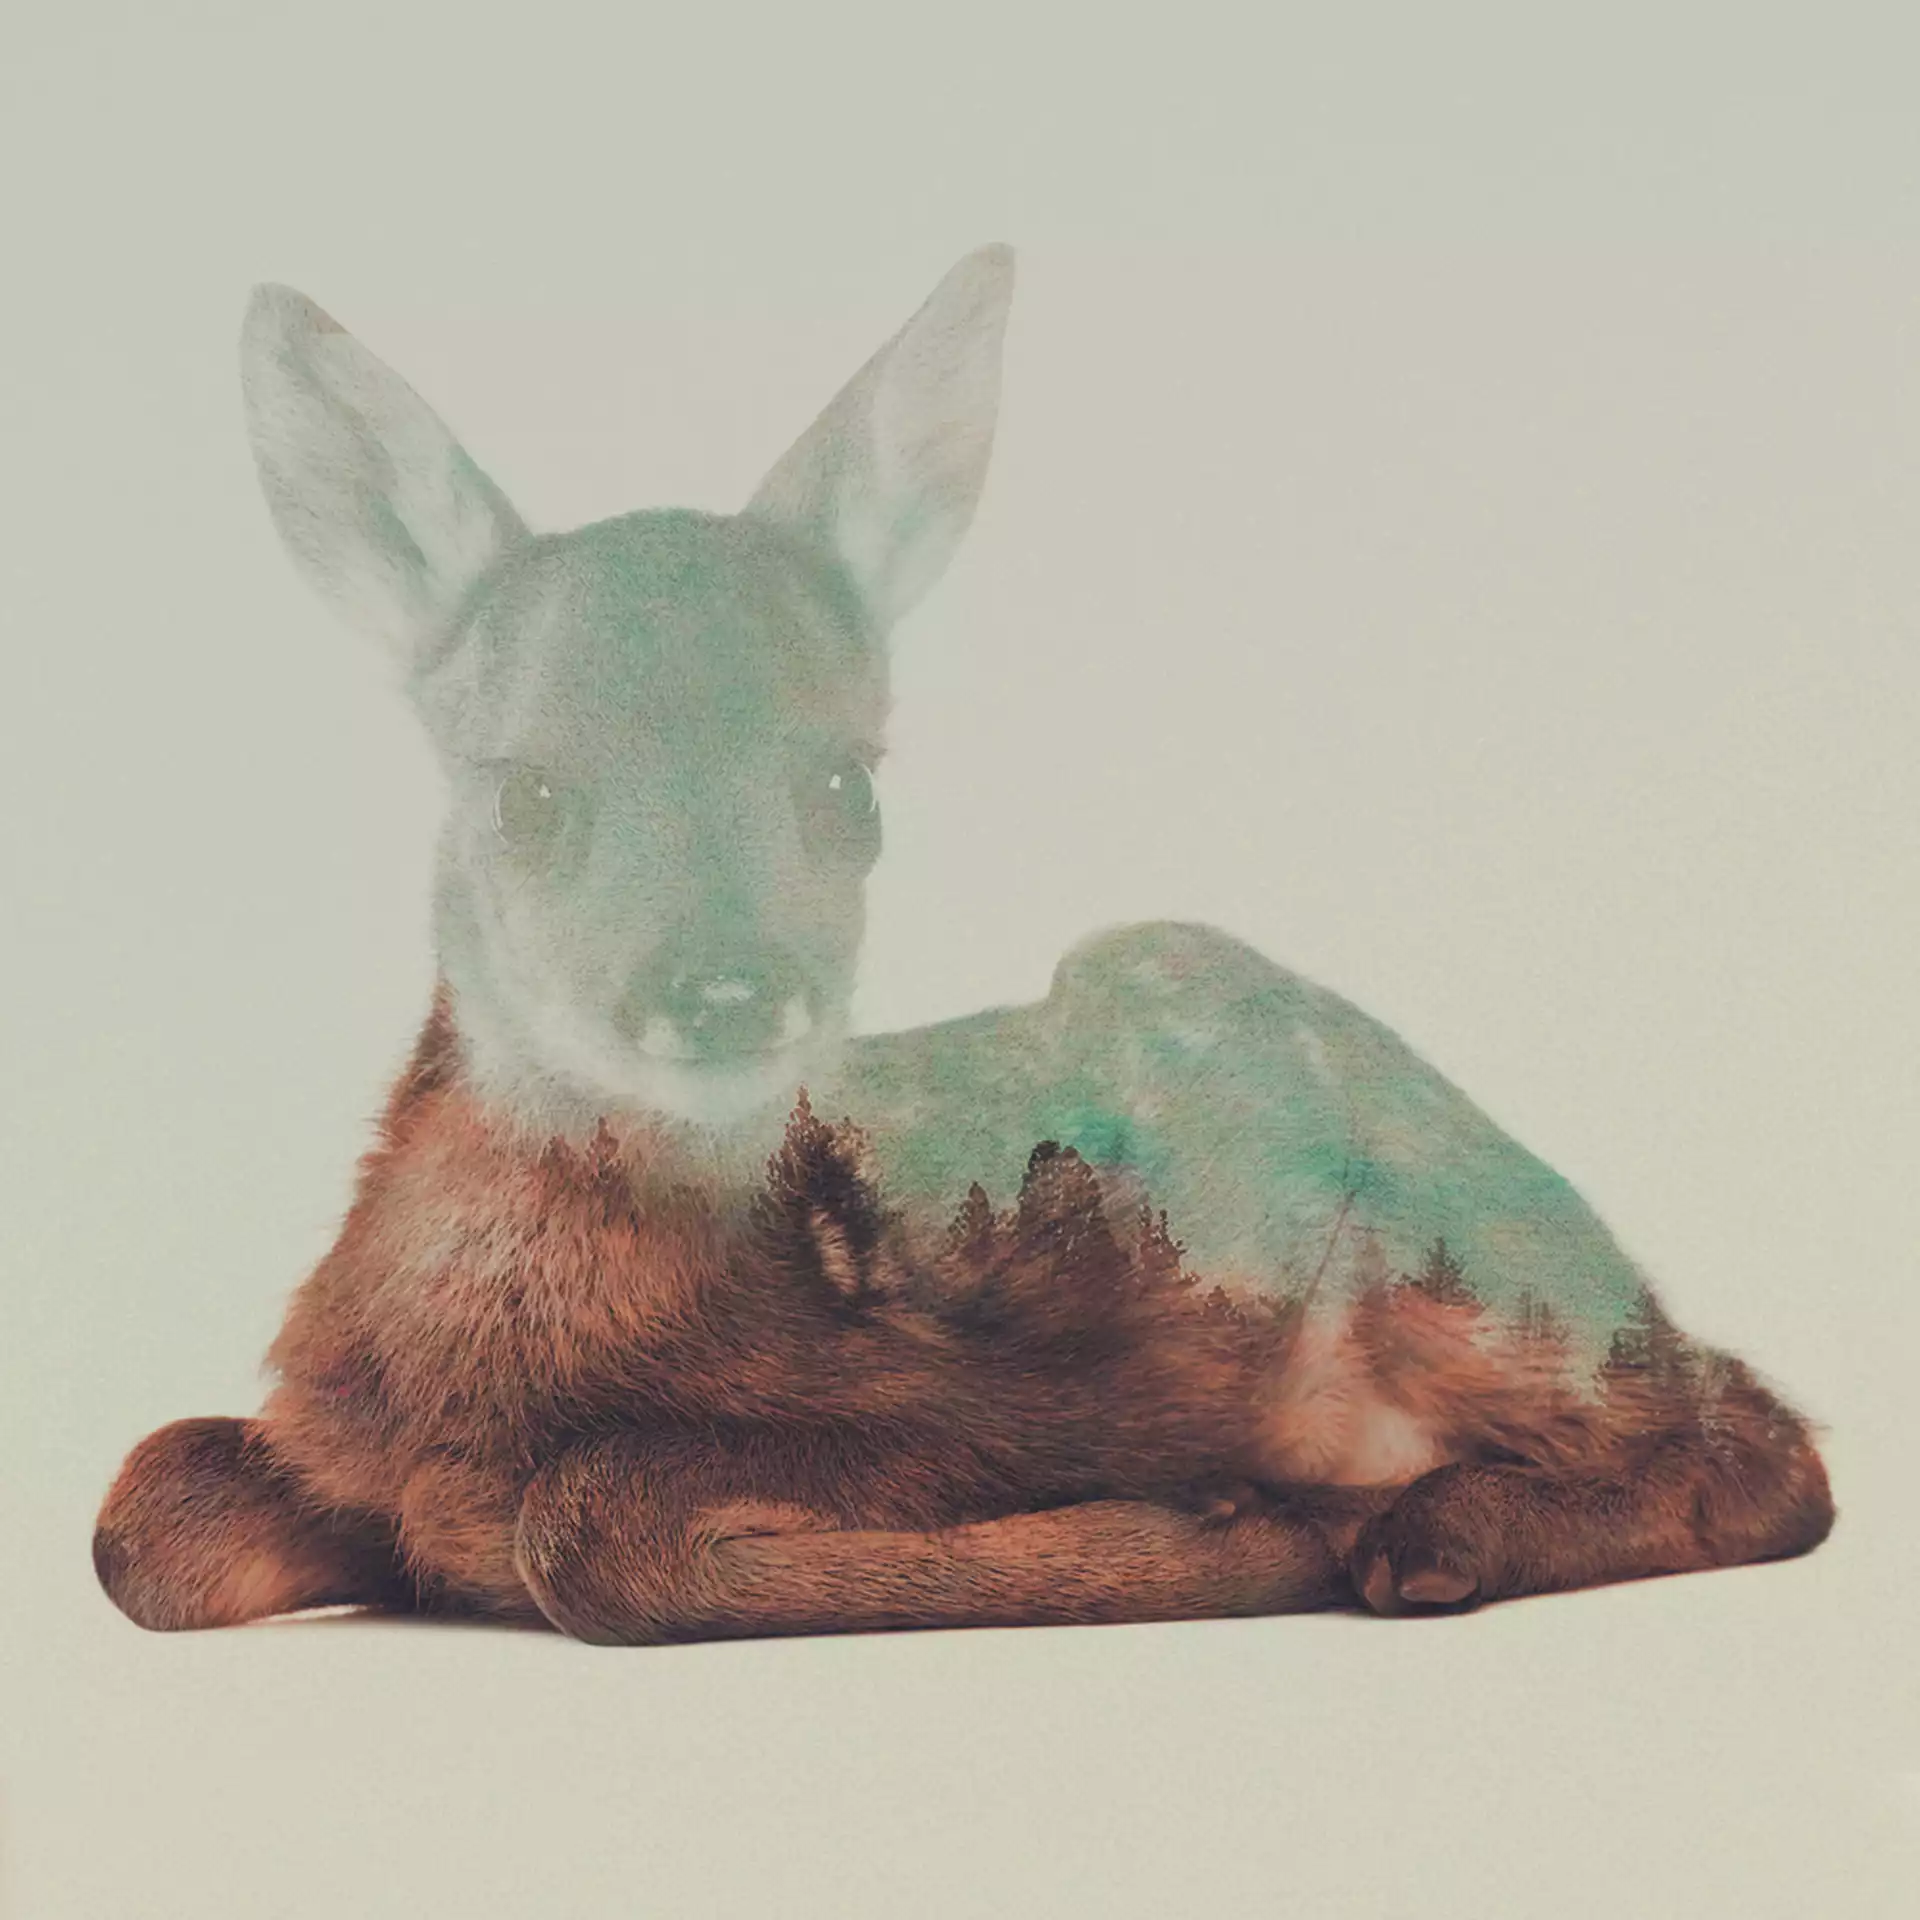 Resting Fawn Couch Throw Pillow by Andreas Lie - Cover (24" x 24") with pillow insert - Indoor Pillow